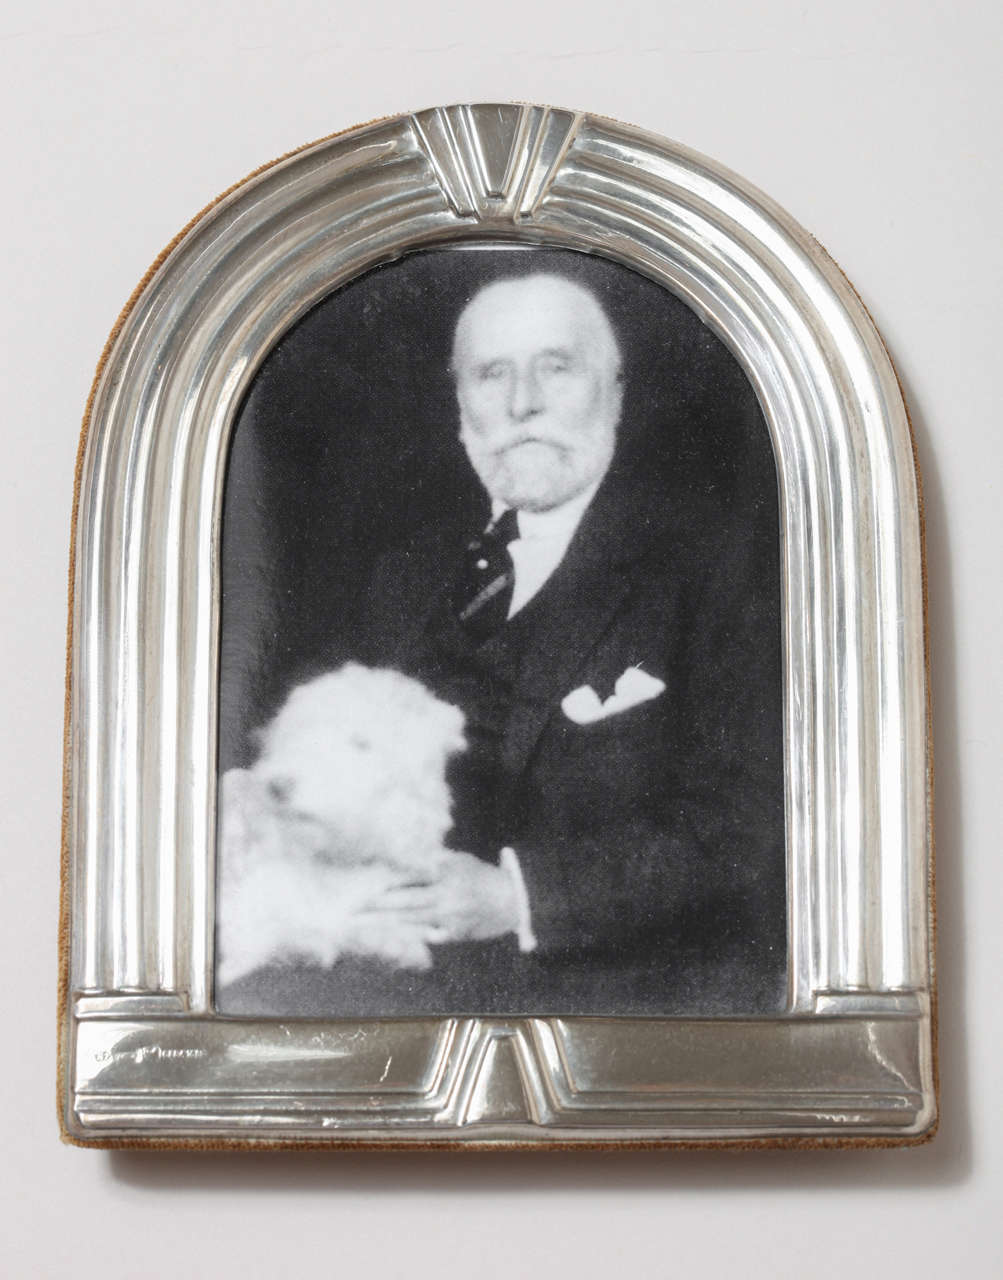 Silver photograph frame with rounded top repousse design. 
Hallmarks:  925 silver/ AL/ saddle/ CESA 1882

*Variety of other Art Deco silver picture frames available.